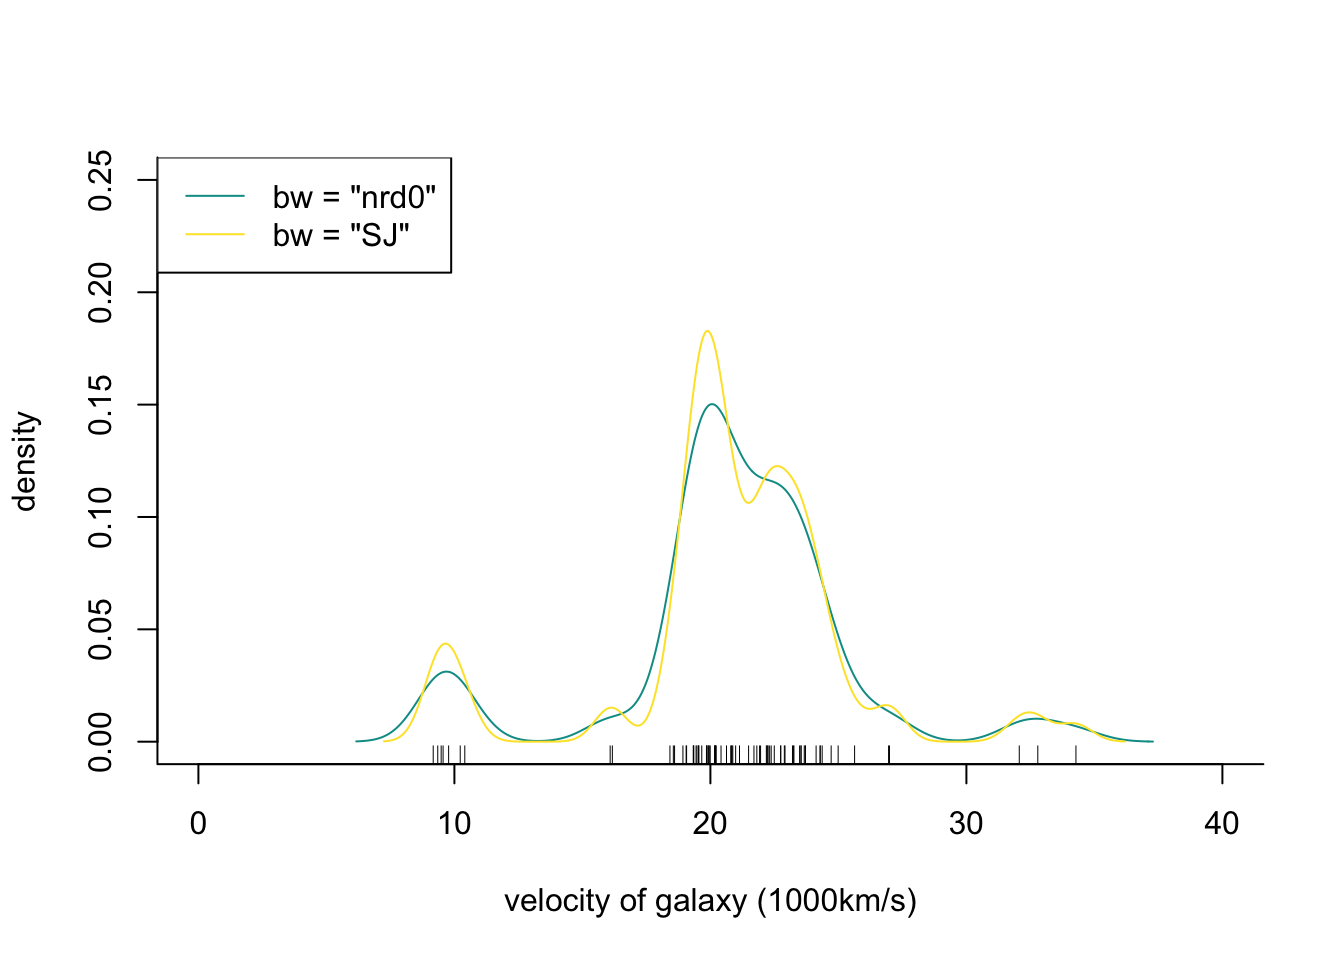 Density of galaxy velocities in 1000km/s, using two kernel density estimators with gaussian kernel but different bandwidth selection procedures.